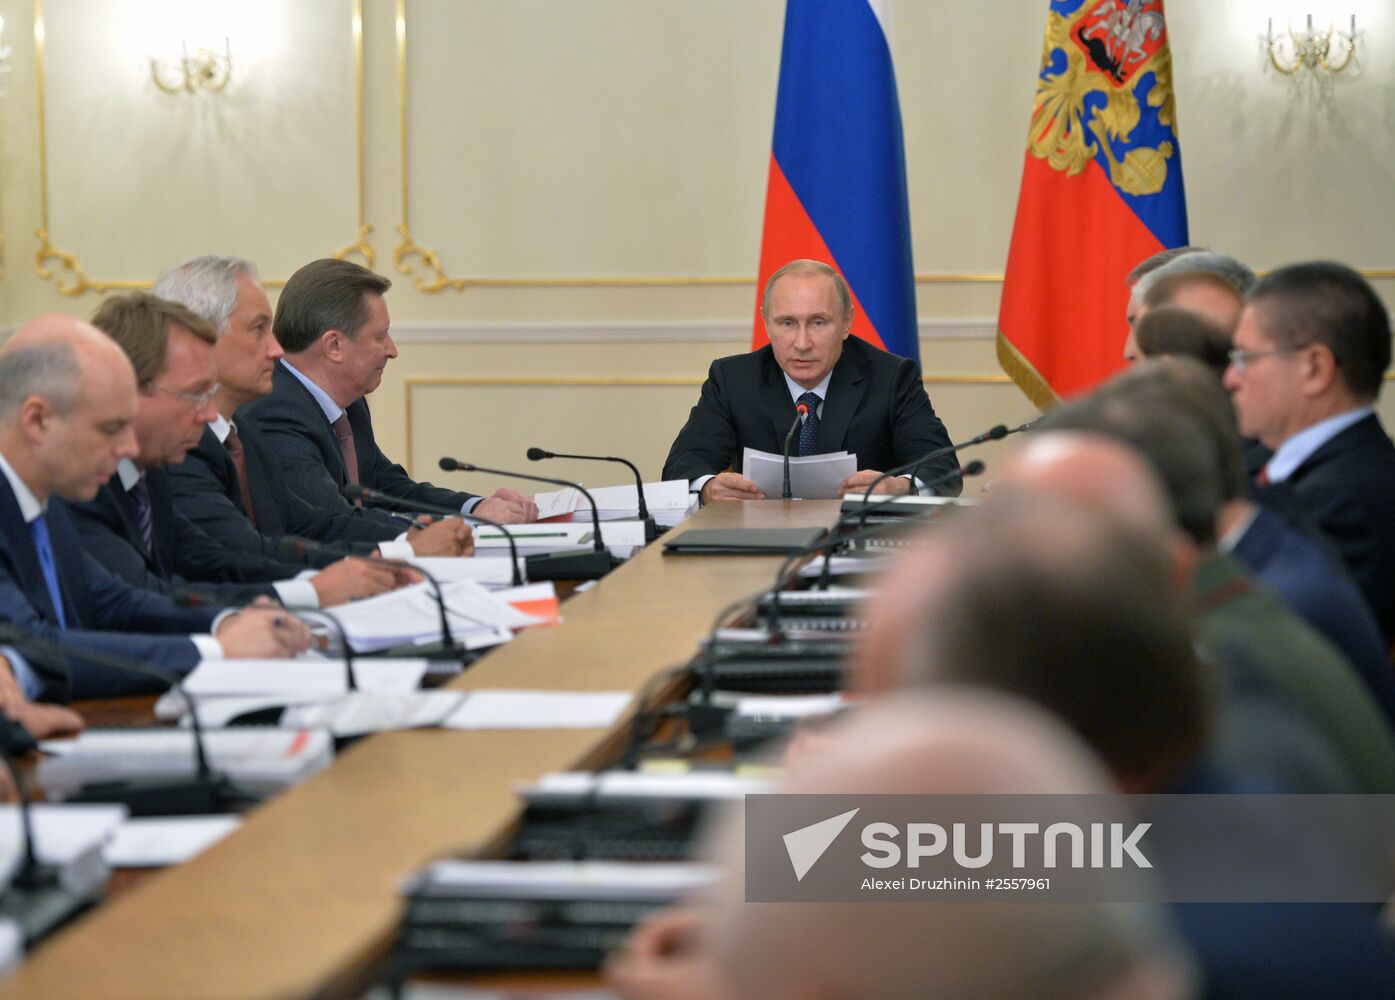 President Vladimir Putin conducts meeting of Commission for Military Technology